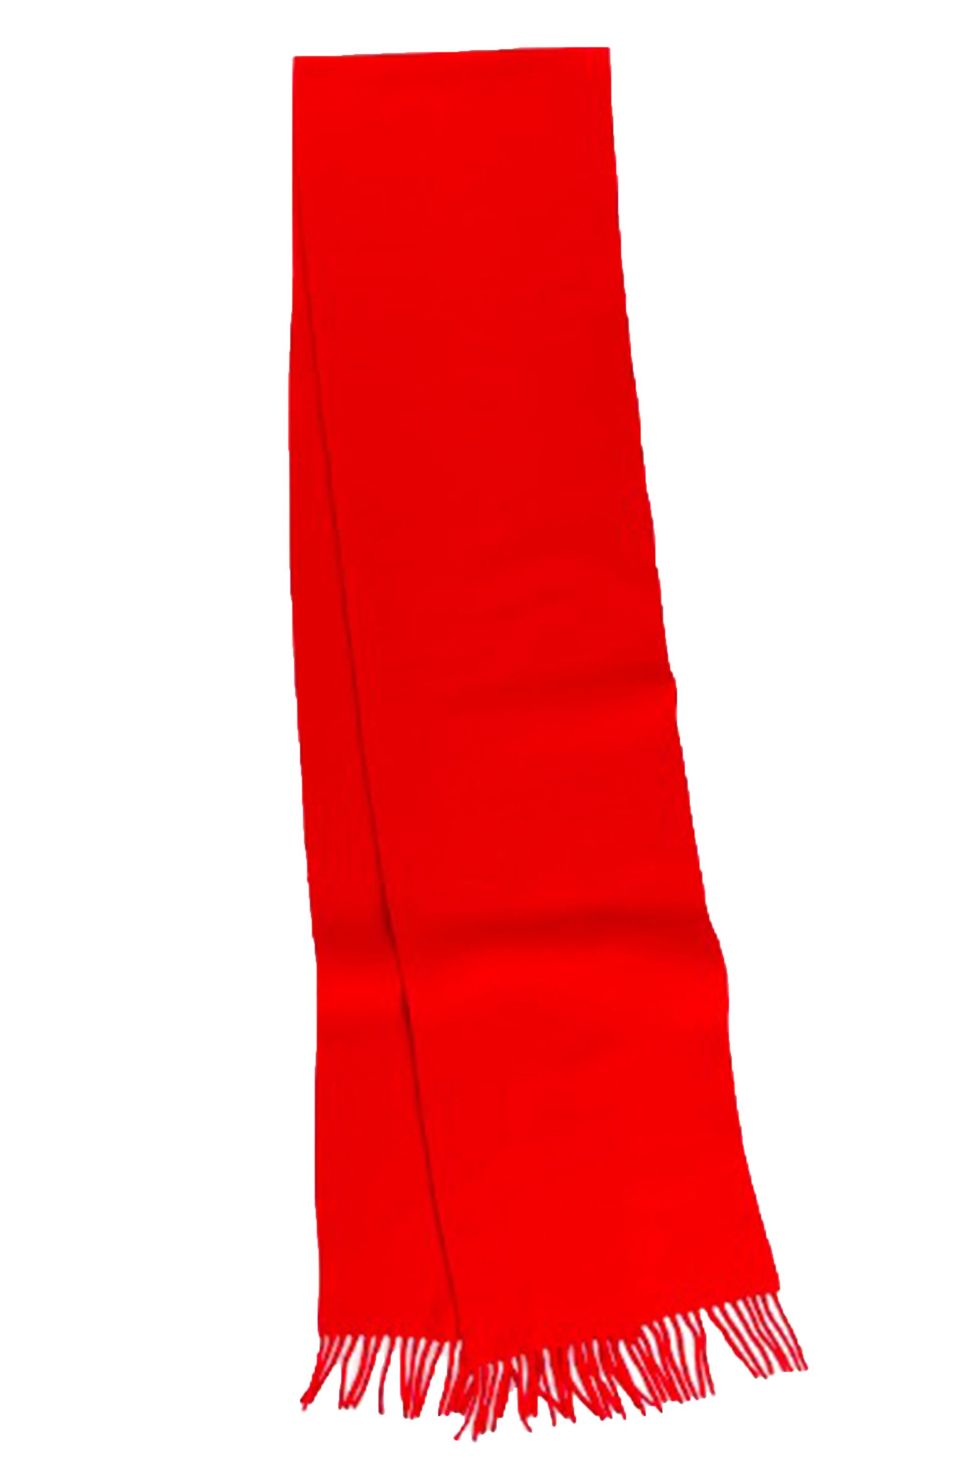 High Quality REd Scarf Blank Meme Template